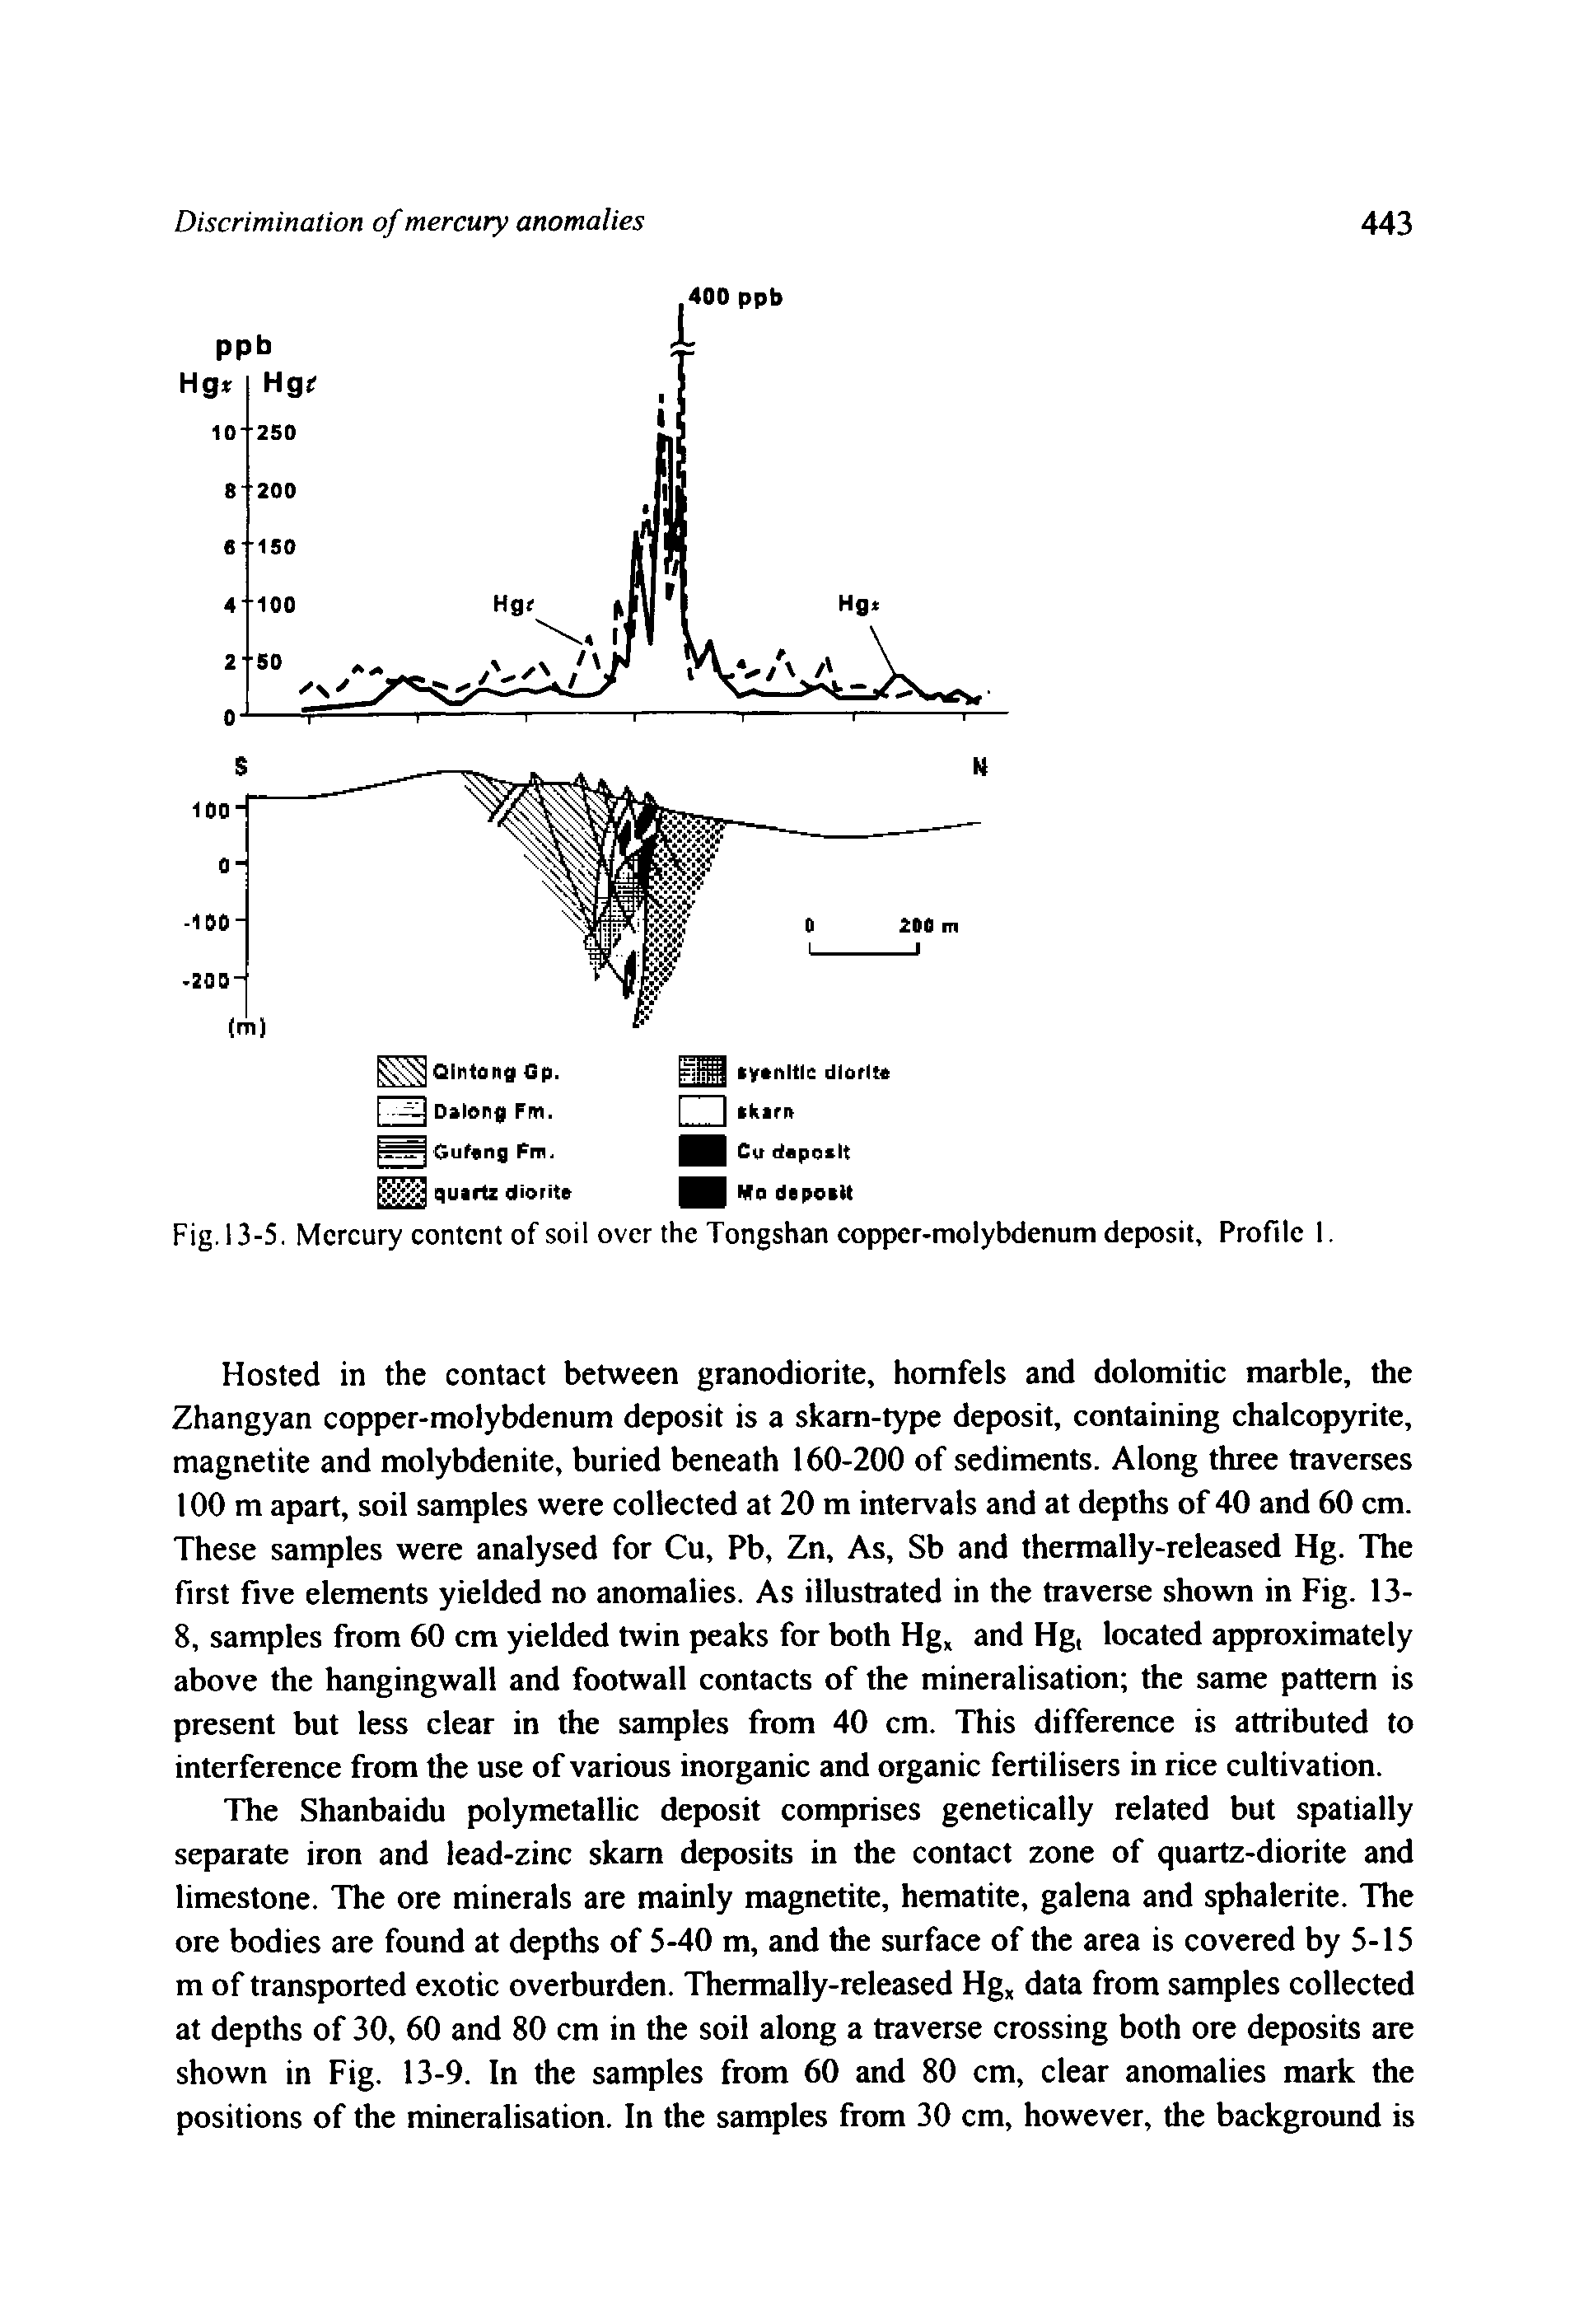 Fig. 13-5. Mercury content of soil over the Tongshan copper-molybdenum deposit. Profile I.